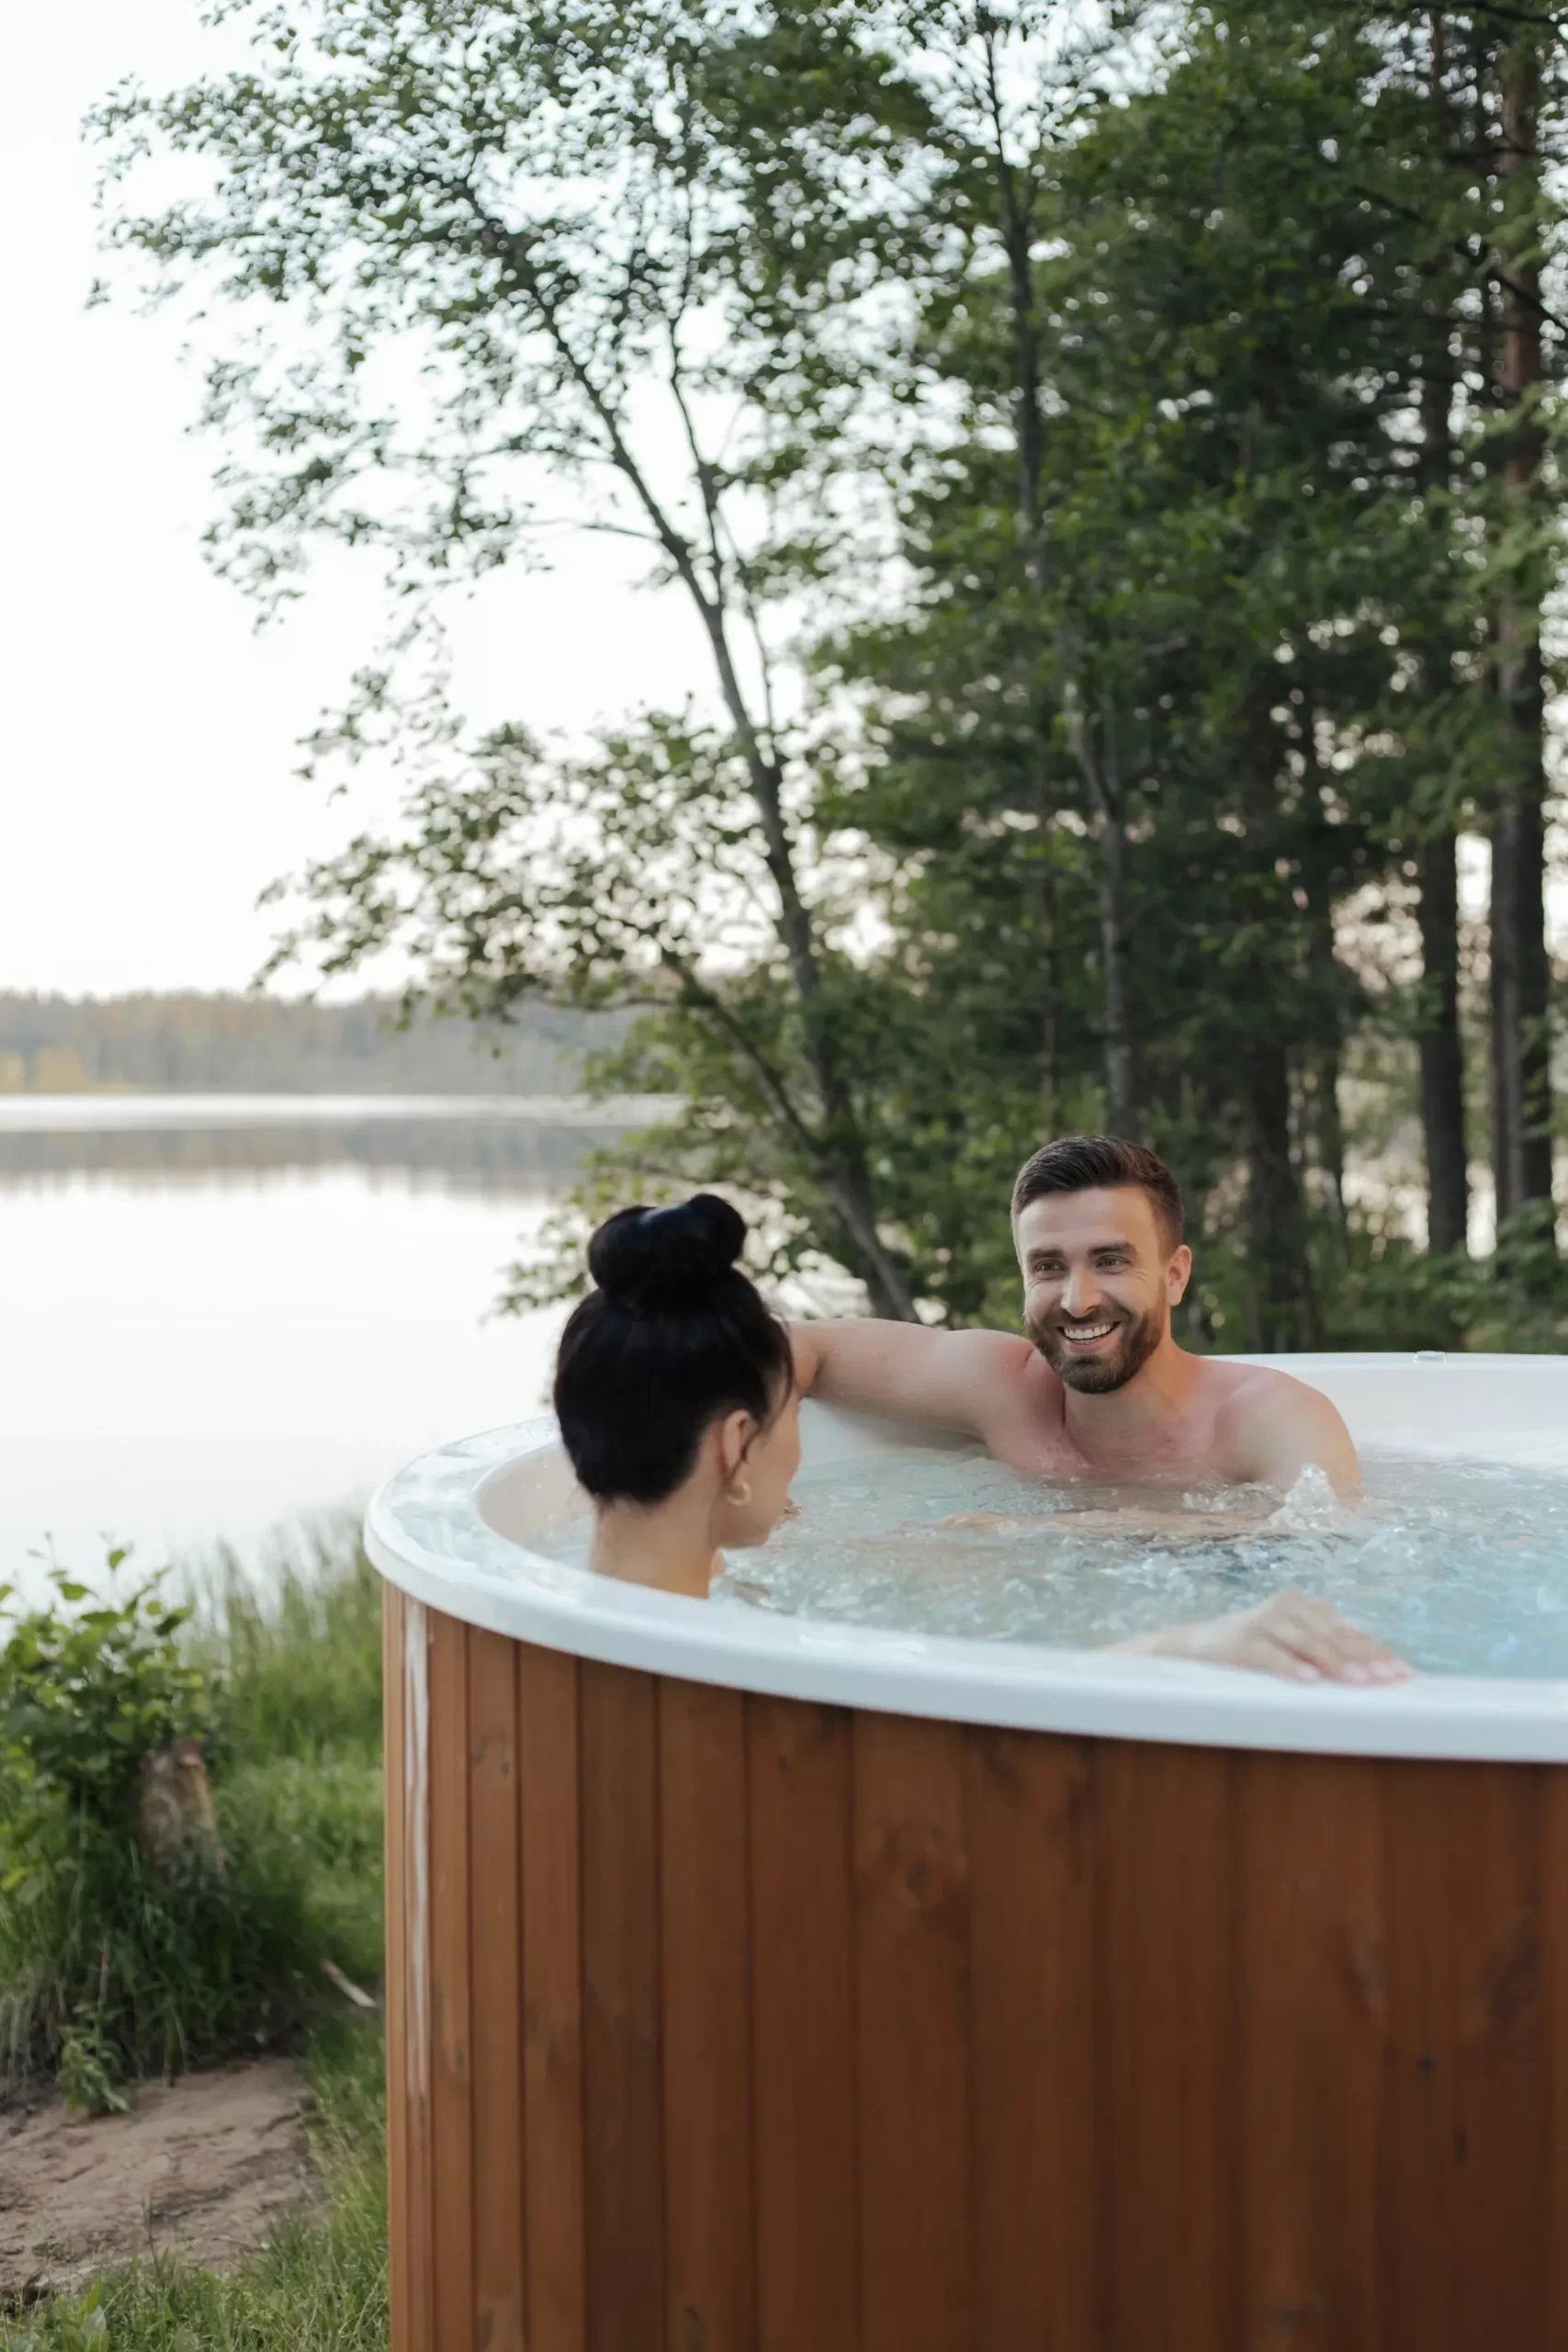 GFCI Protection and Hot Tubs: An Essential Guide to Electrical Safety at Home